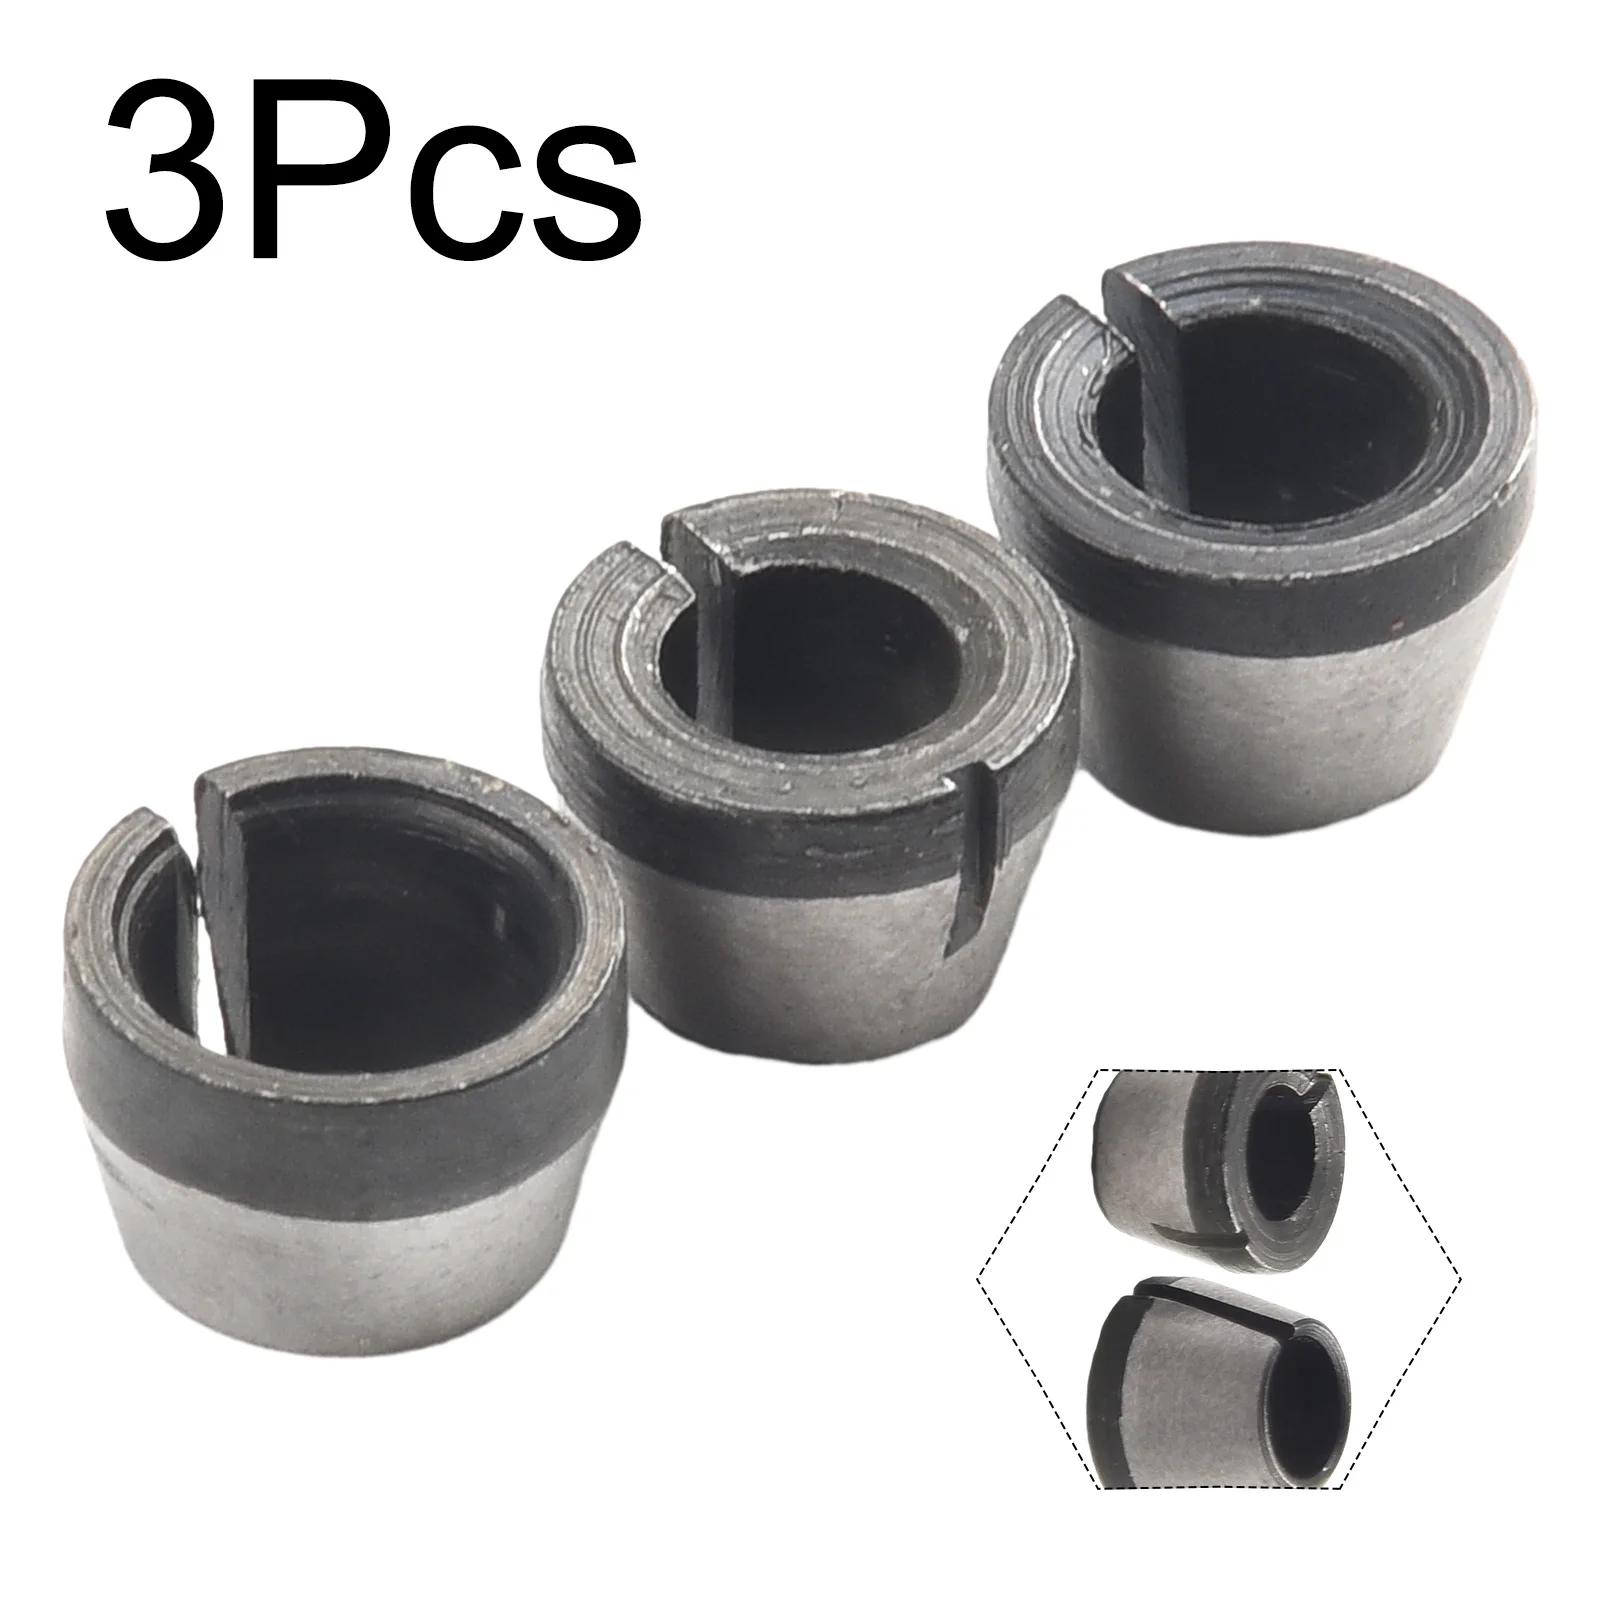 3PCS Collet Chuck High Precision Adapter Engraving Trimming Machine Electric Router Milling Cutter Accessories 40pcs lot tig welding kit torch collet gas lens pyrex glass cup practical welding accessories for wp 9 20 25